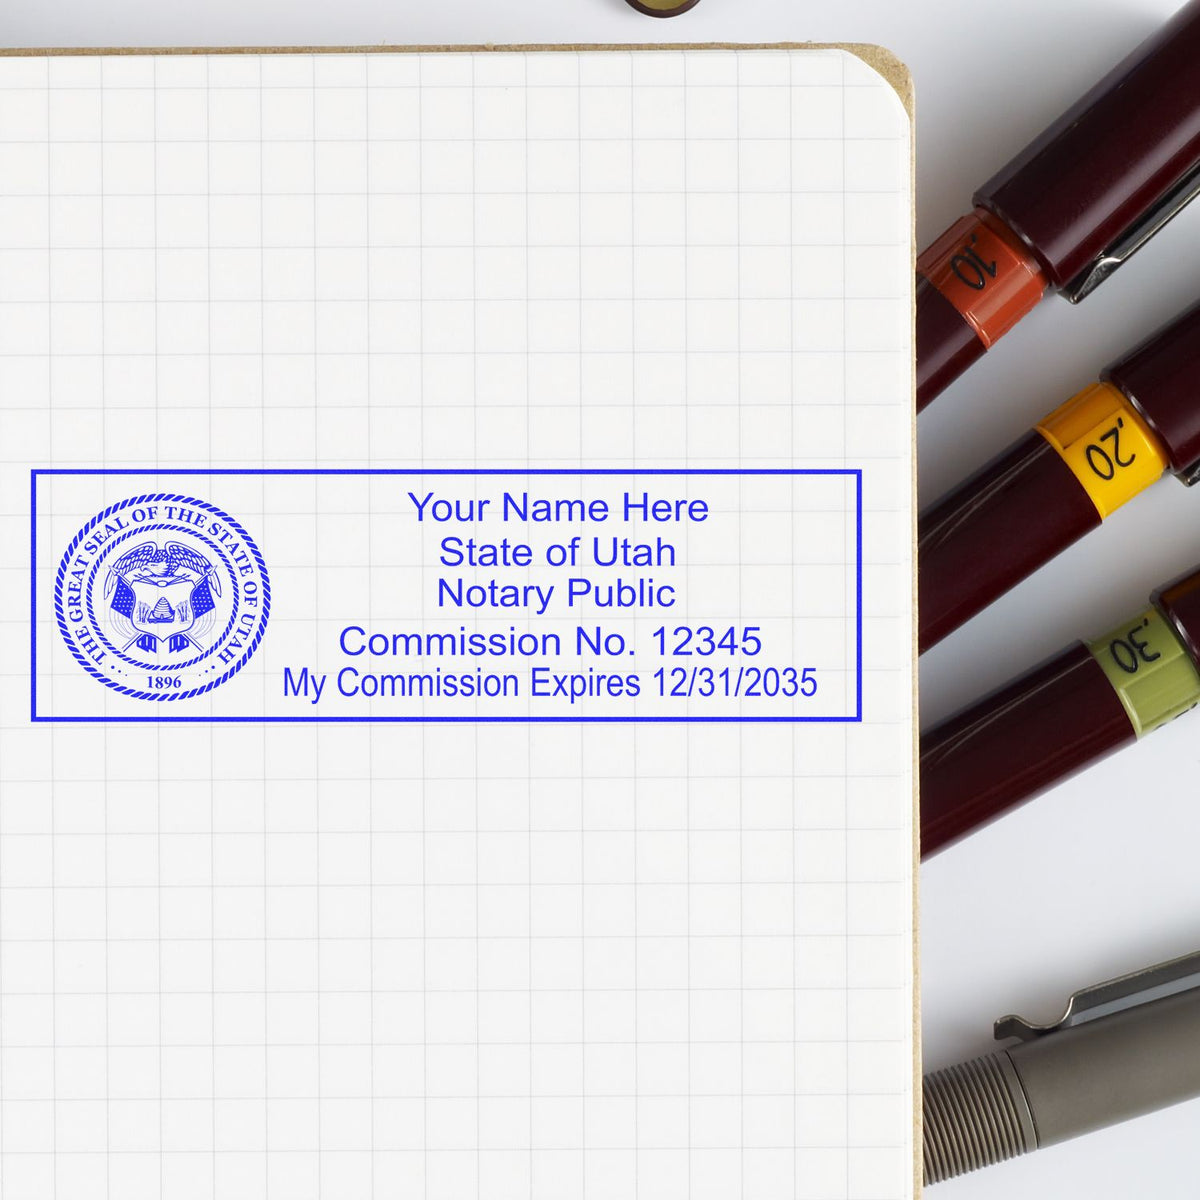 Slim Pre-Inked State Seal Notary Stamp for Utah in use photo showing a stamped imprint of the Slim Pre-Inked State Seal Notary Stamp for Utah